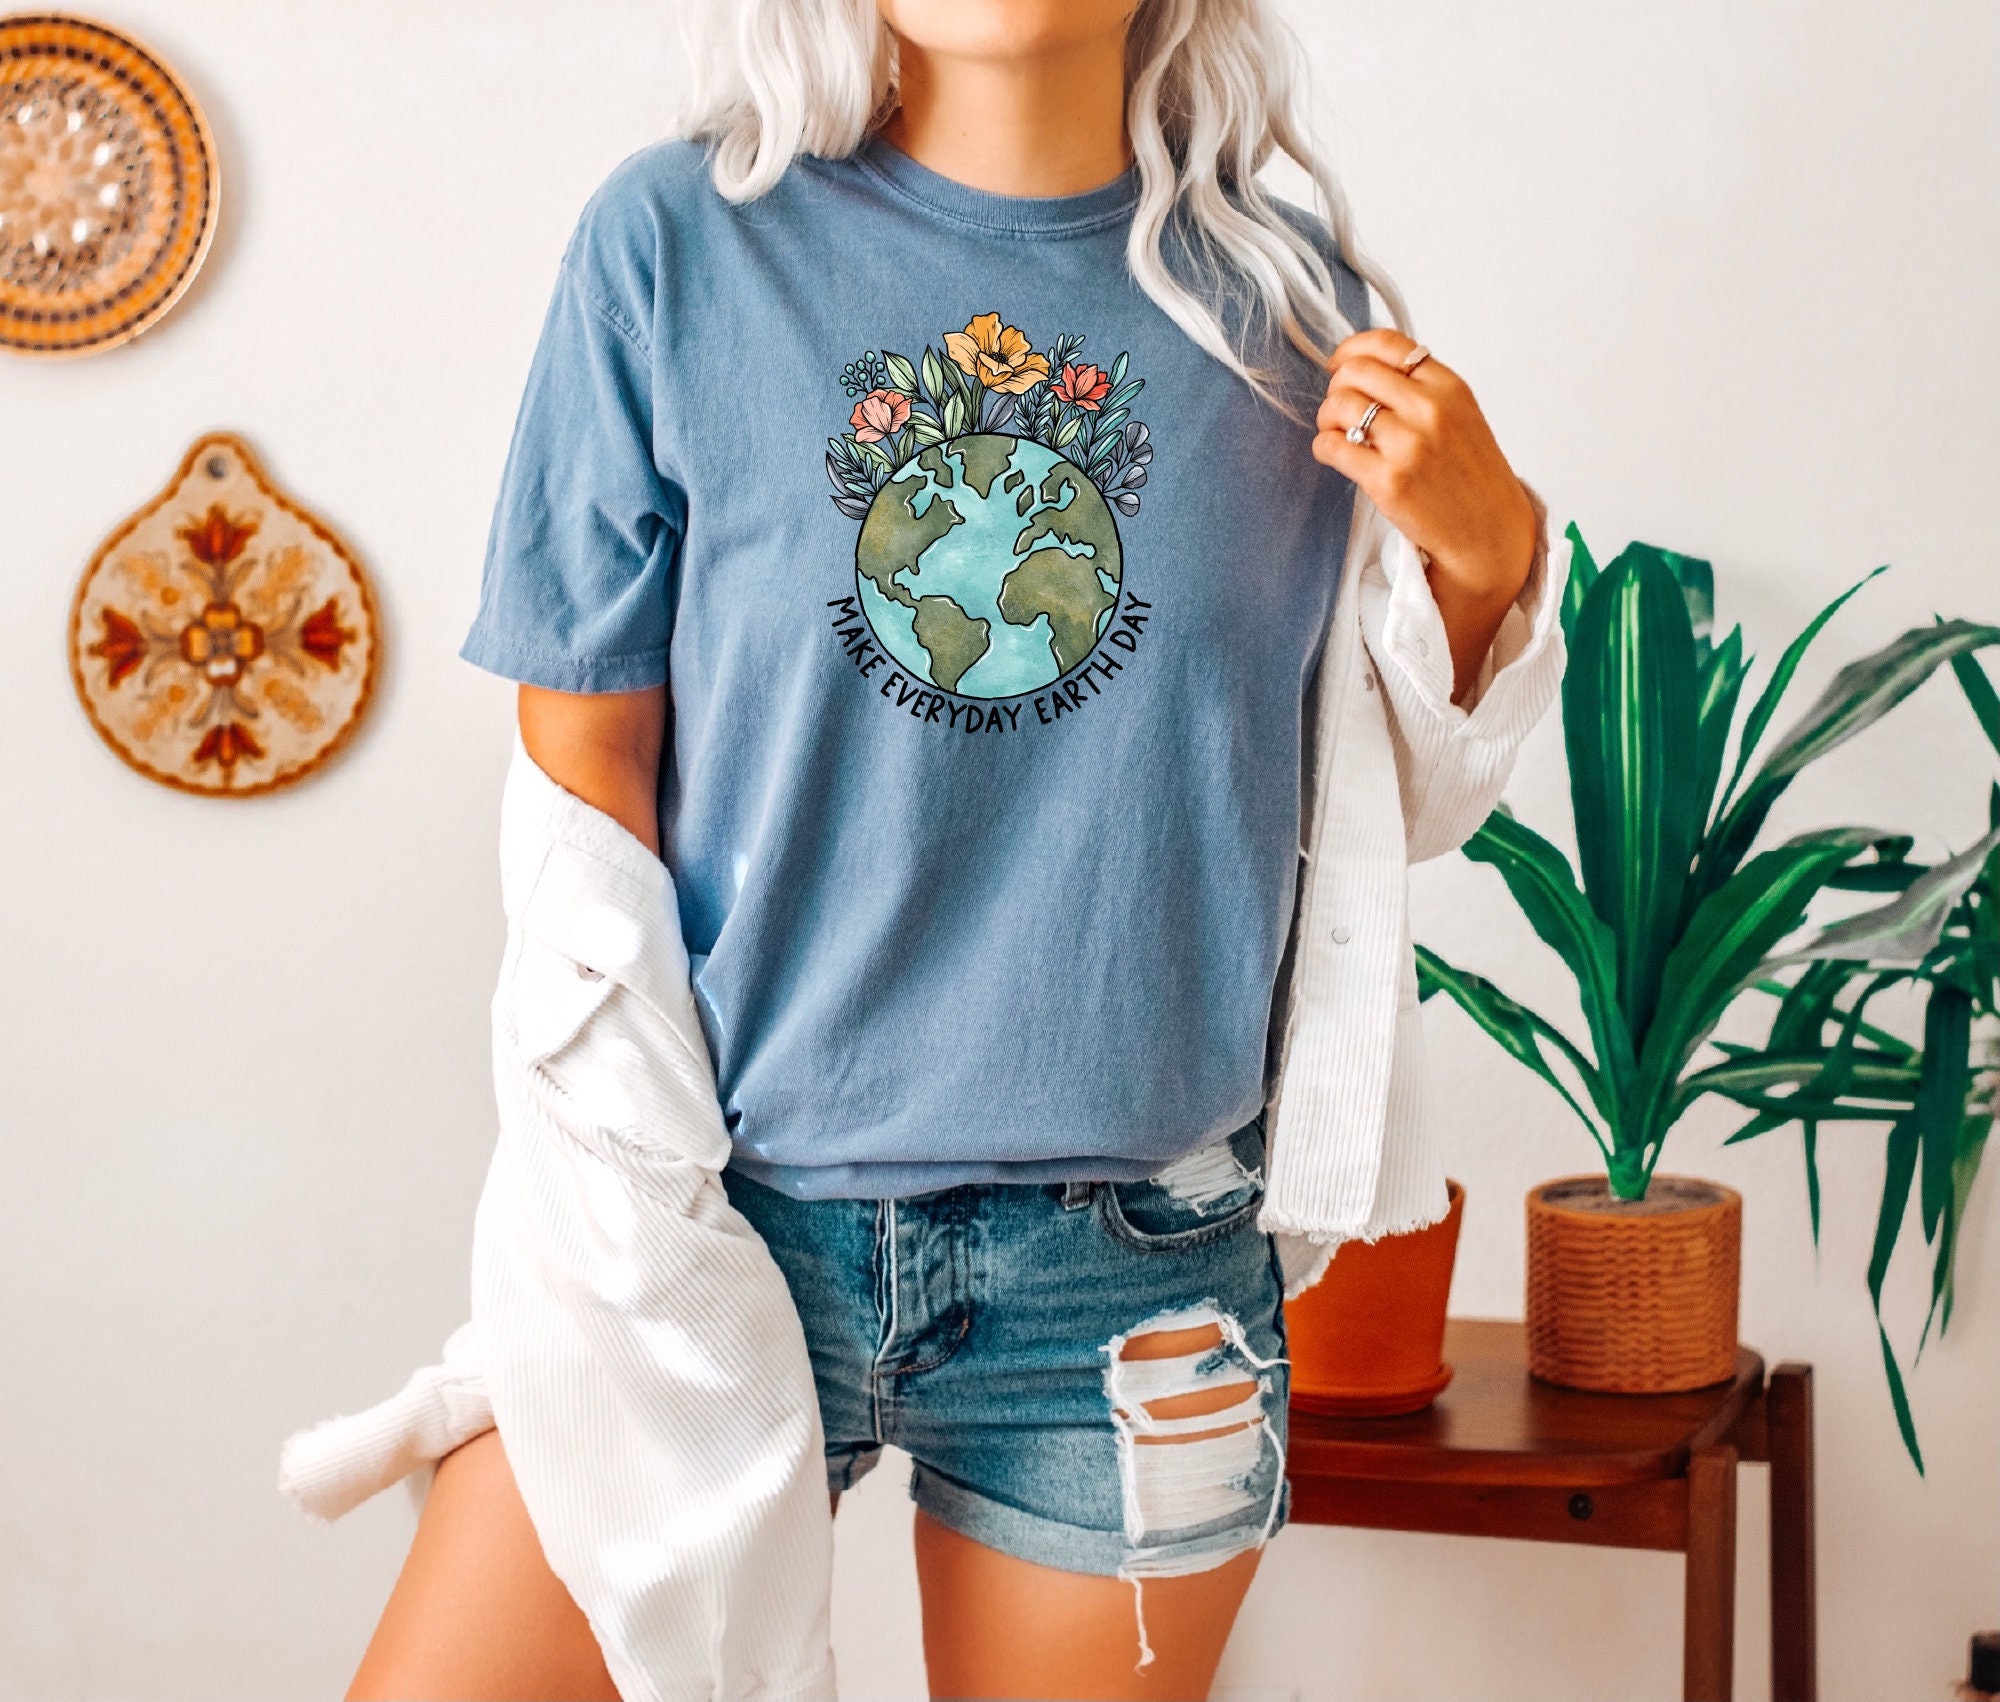 Discover Make everyday earth day shirt, Earth awareness t-shirt